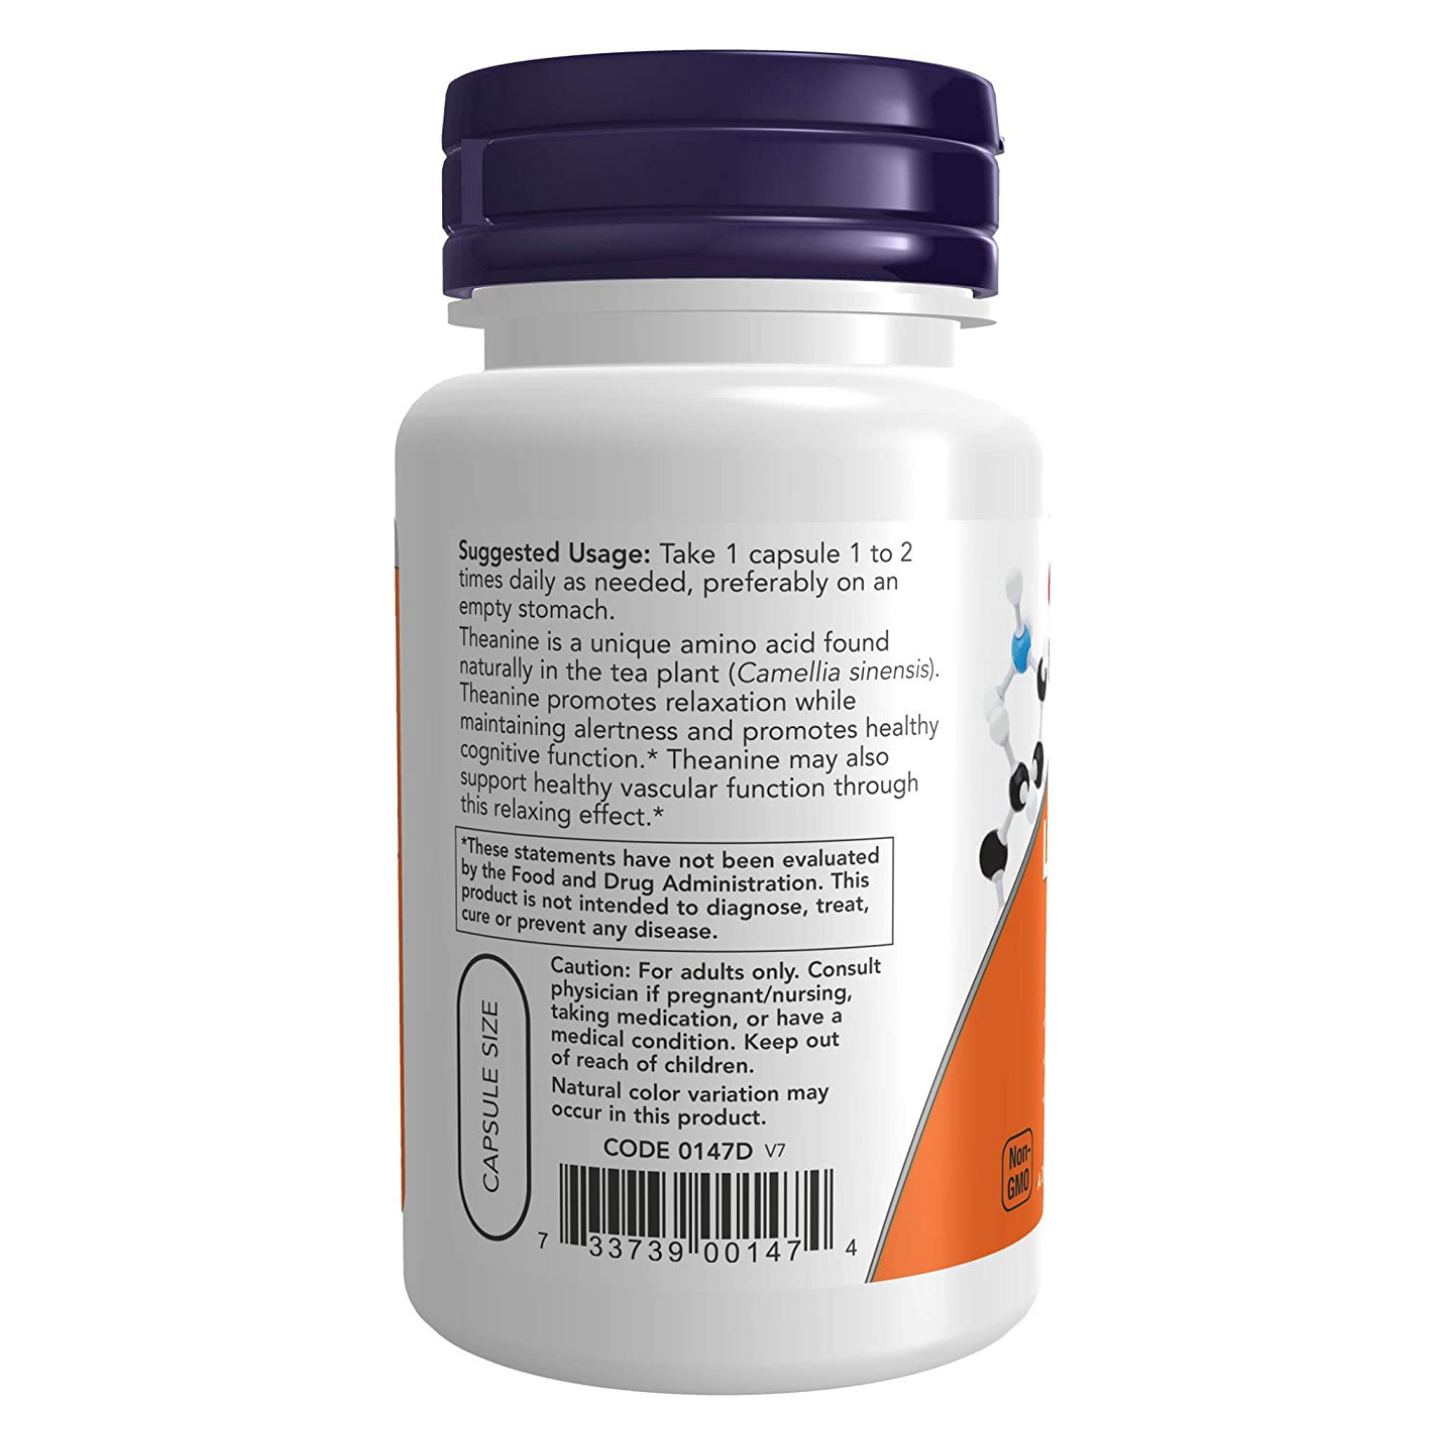 NOW - Double Strength L-Theanine 200 mg - 60 Veg Capsules